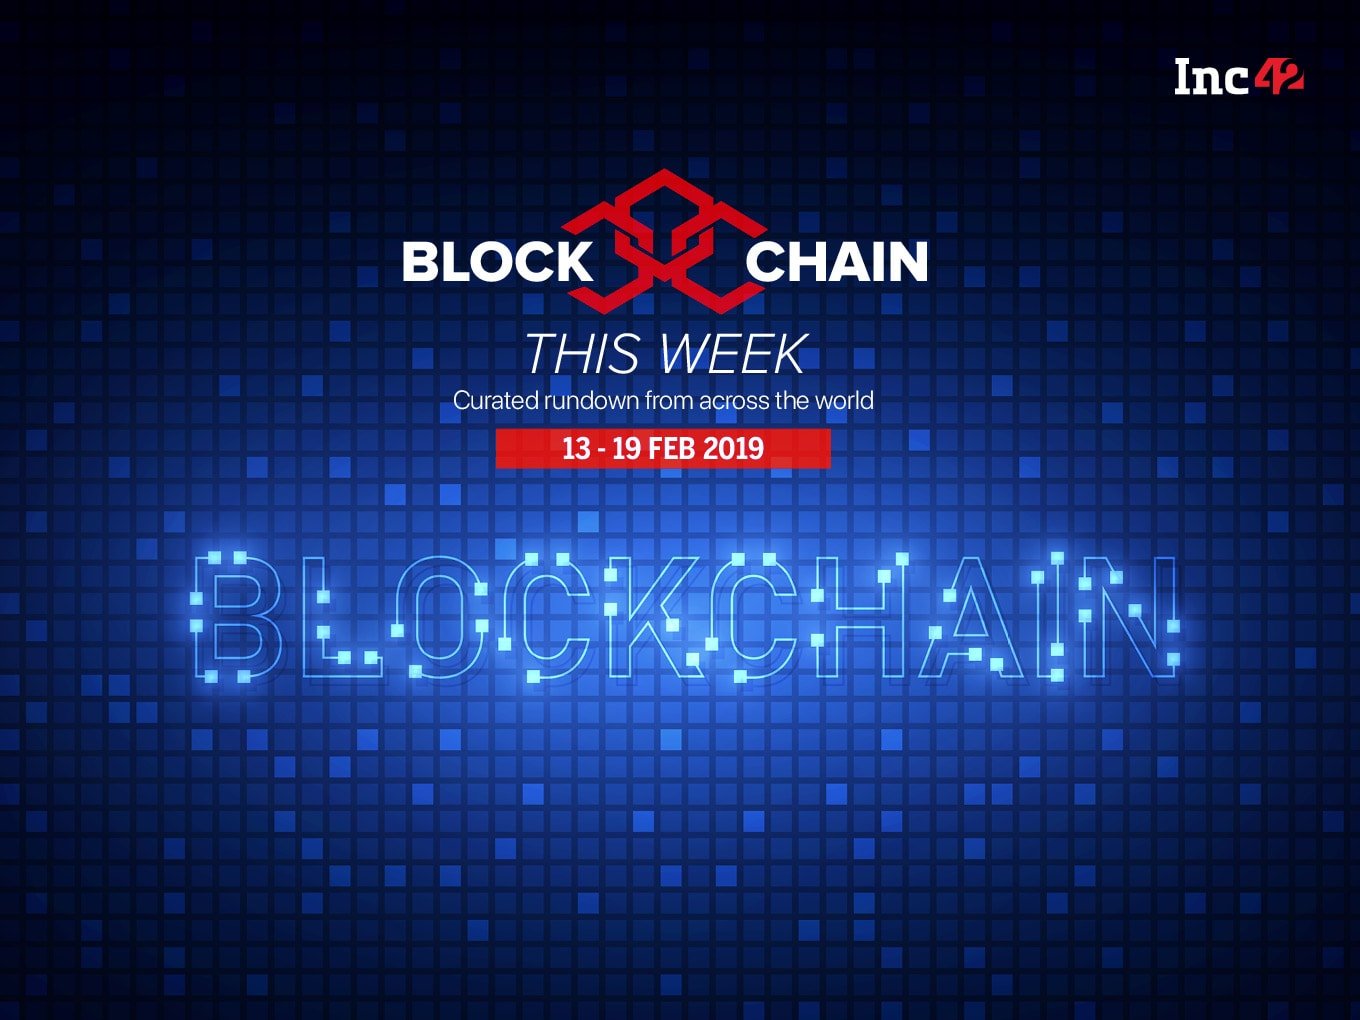 Blockchain This Week: Government-Backed Blockchain Event